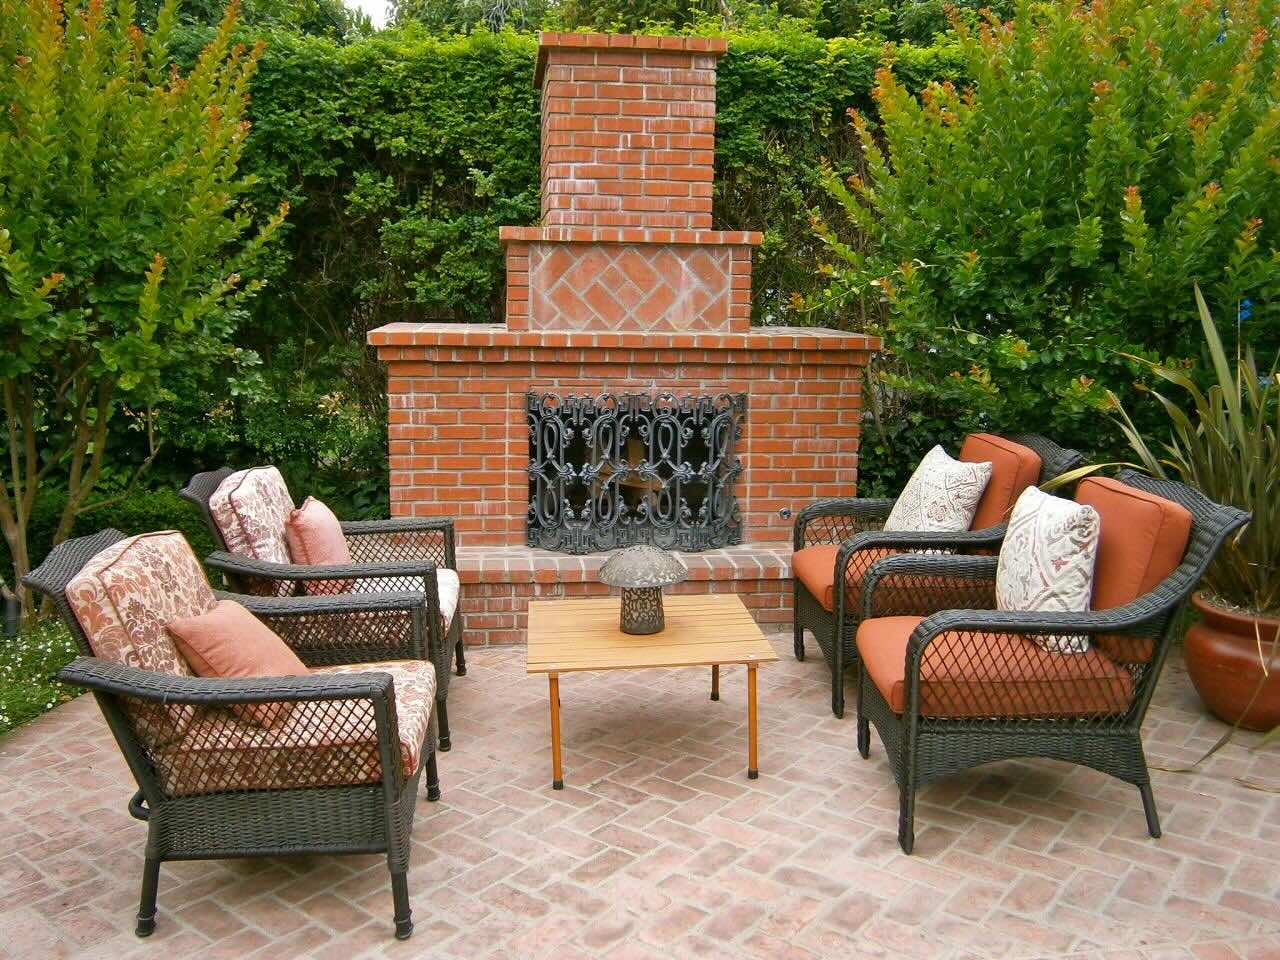 How To Build A Brick Fireplace Outside